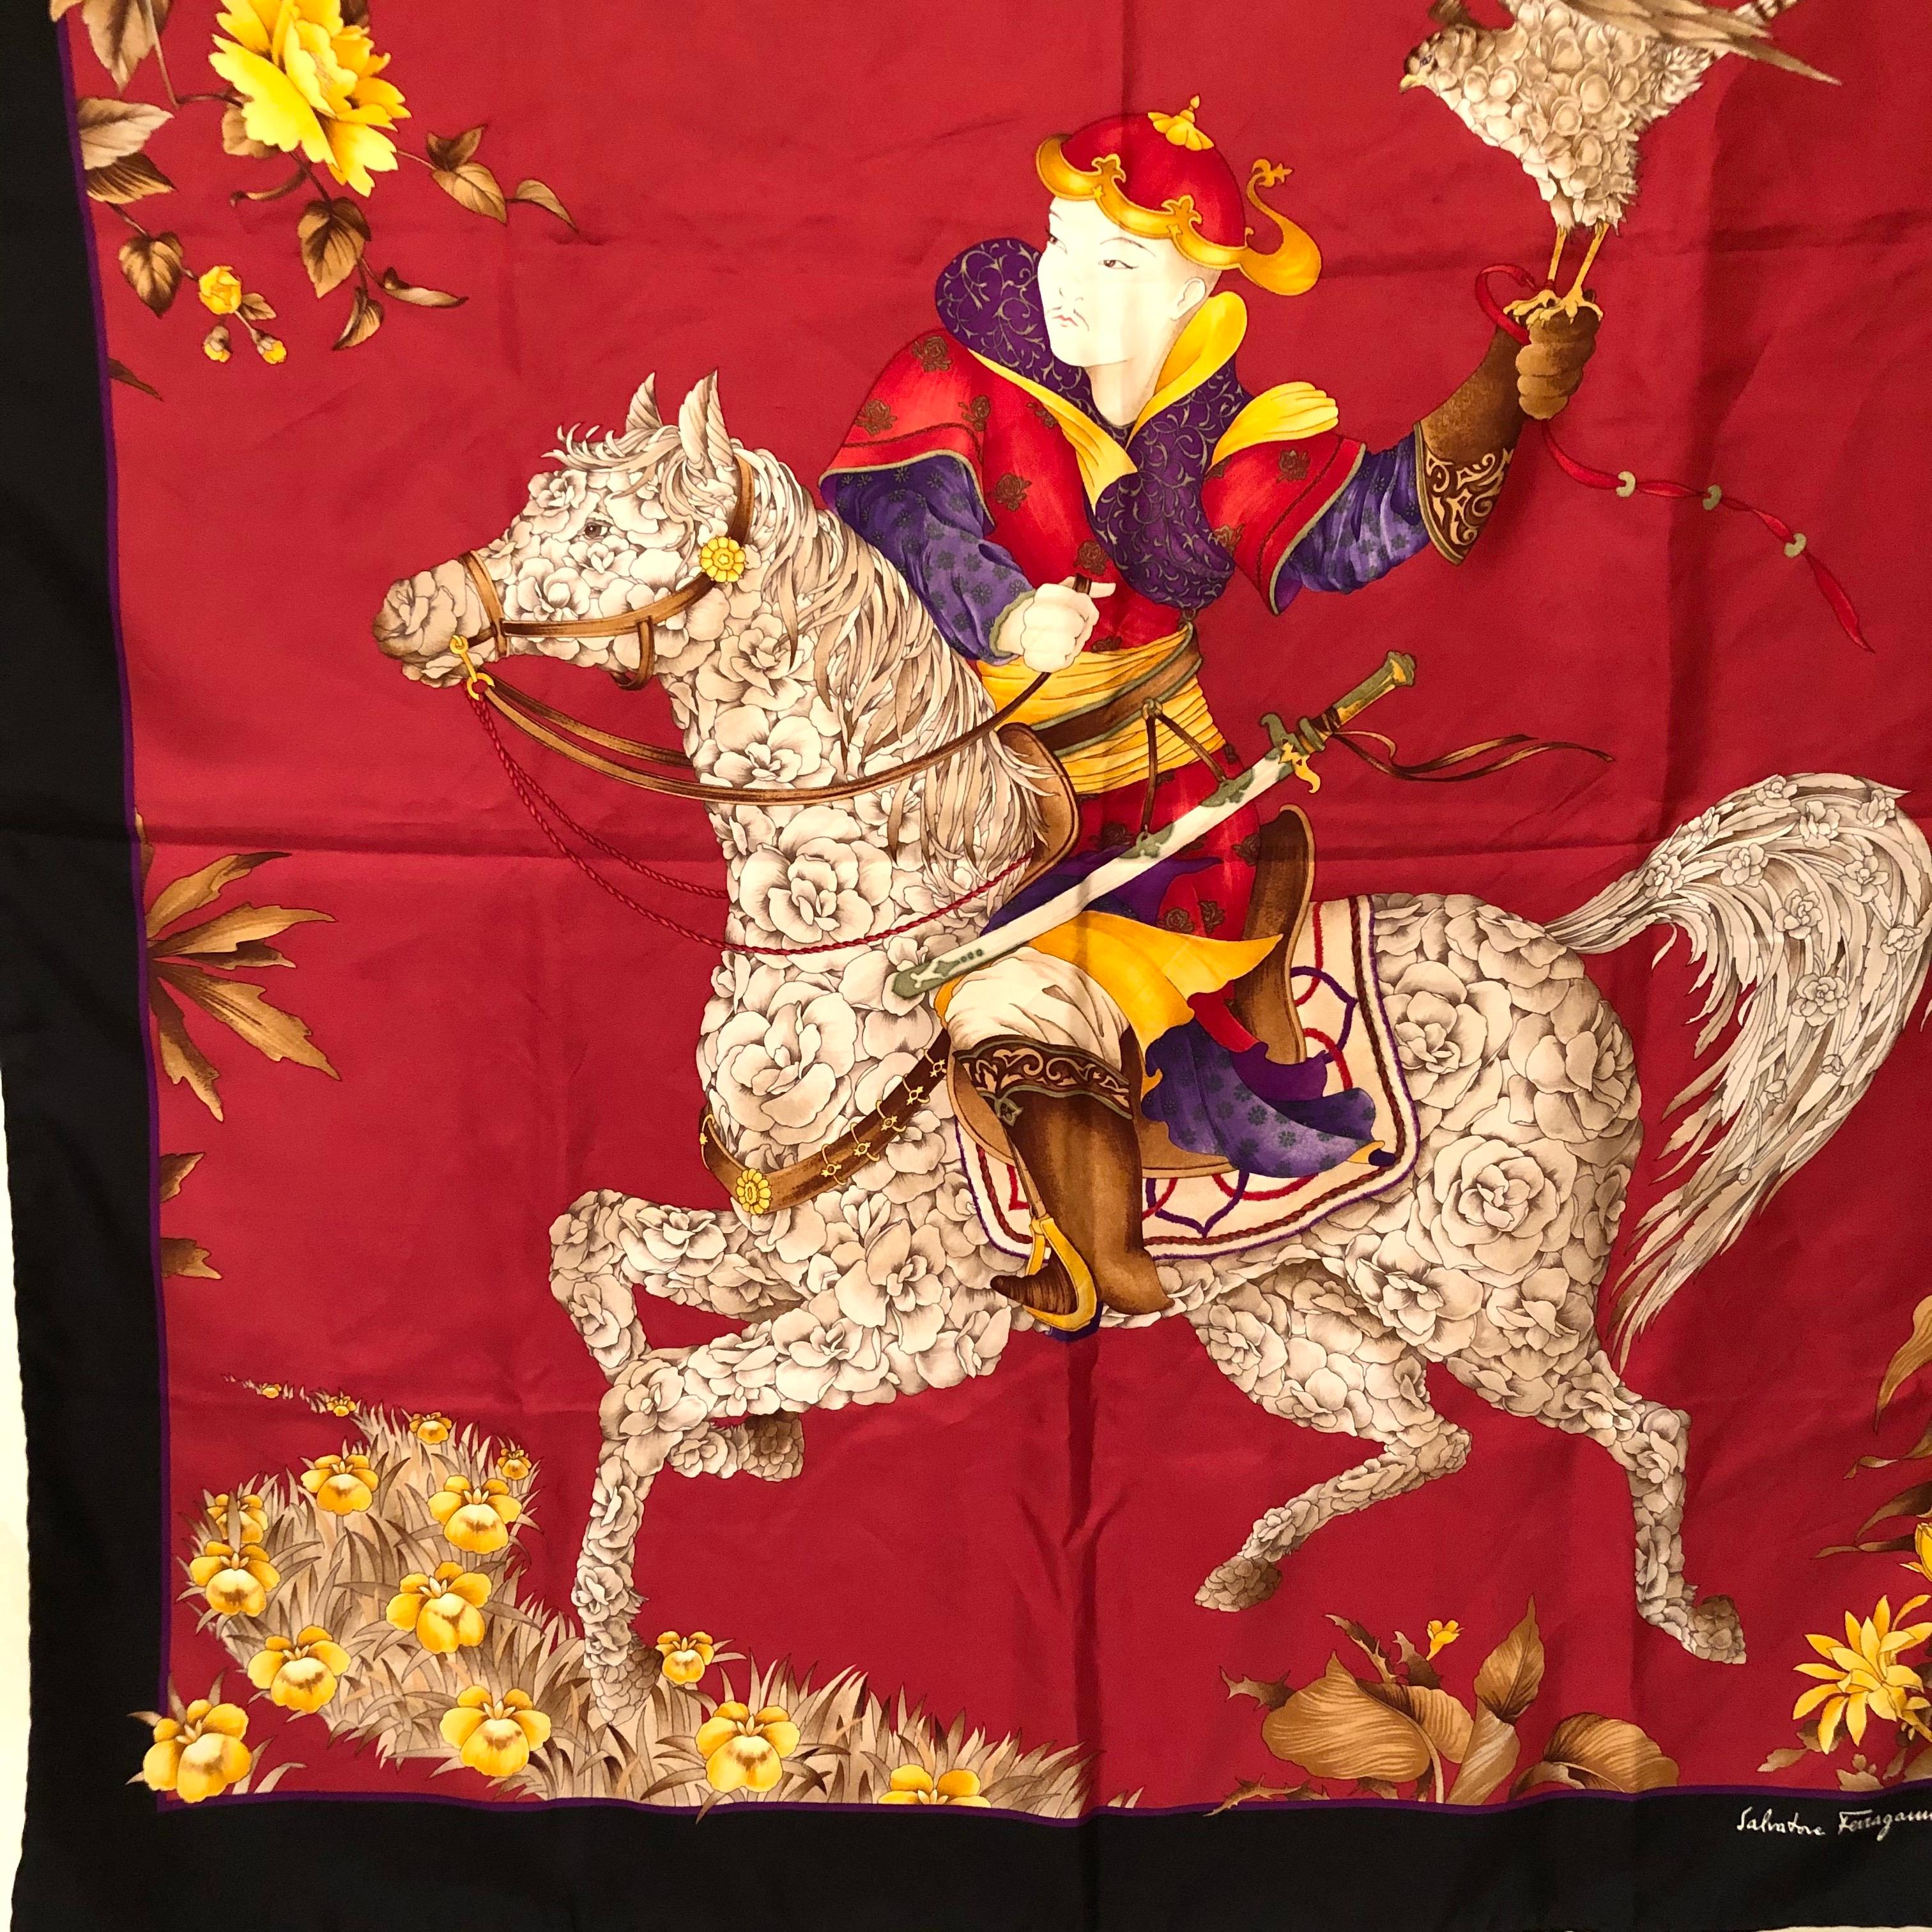 Other Salvatore Ferragamo Red Silk Scarf with a Stunning Design of a Man on a Horse